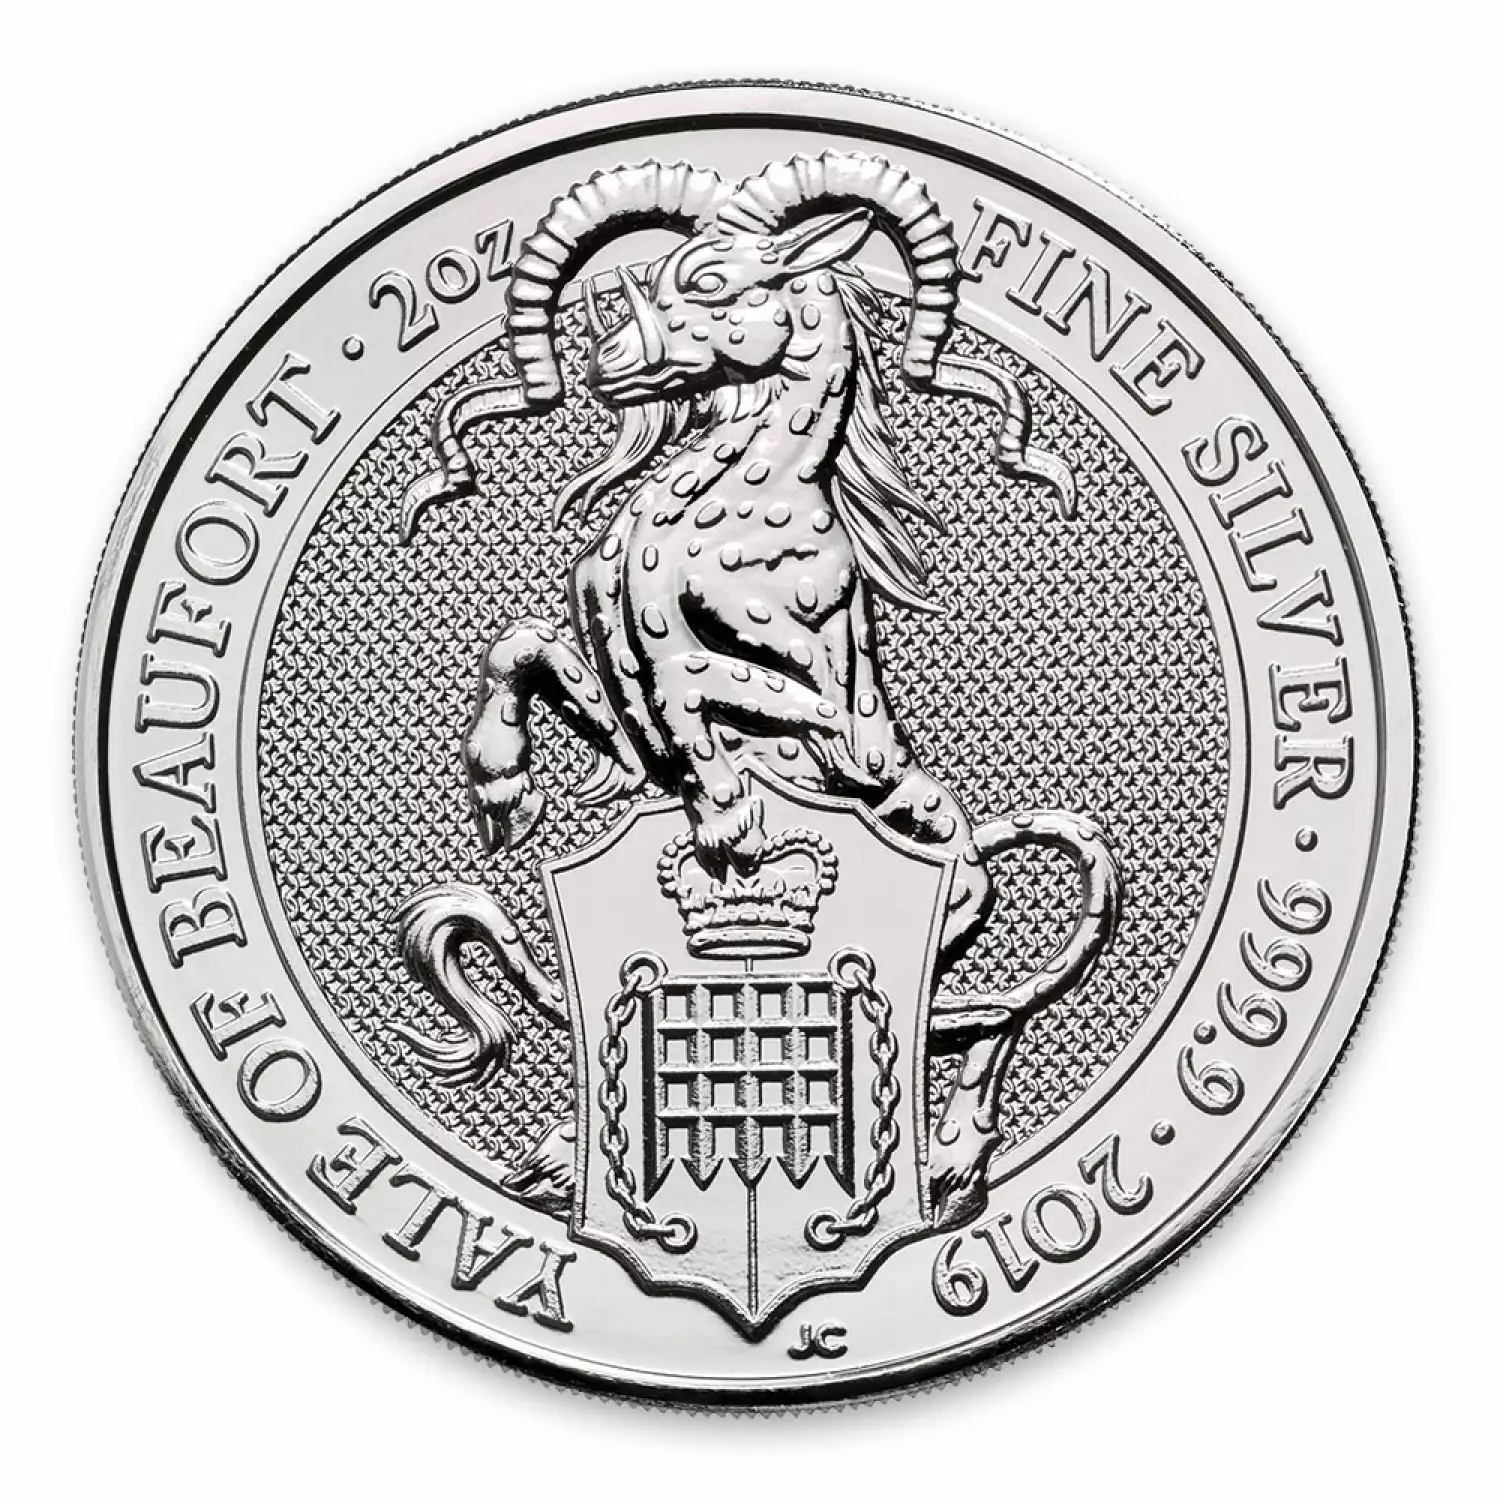 2019 2oz Silver Britain Queen's Beast: The Yale of Beaufort